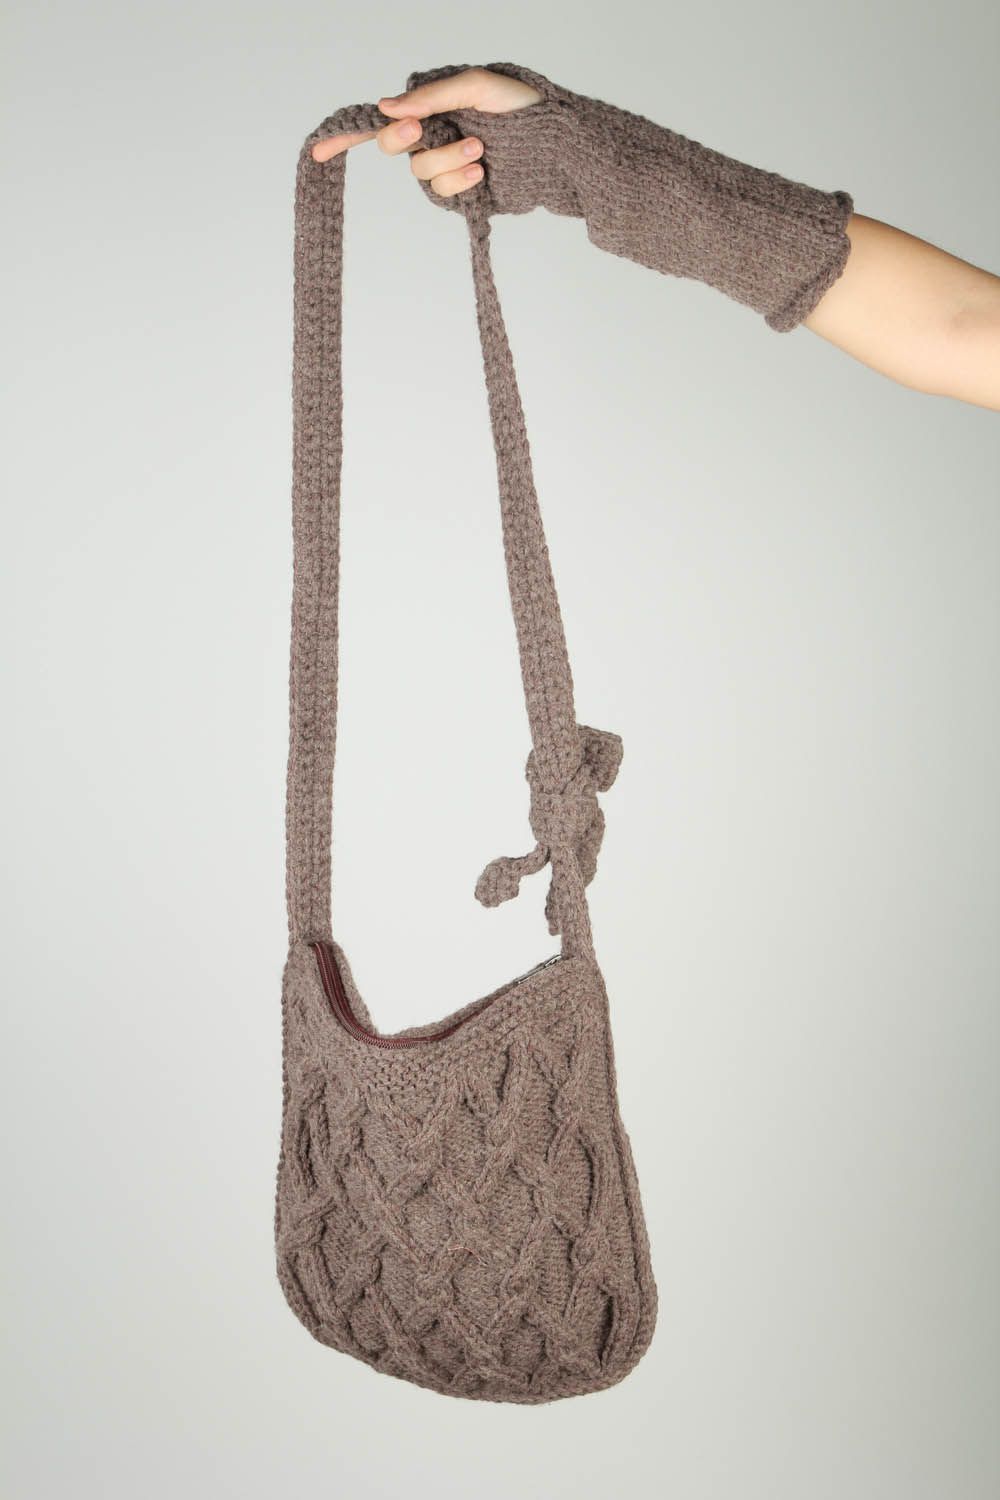 Knitted bag and mitts photo 3